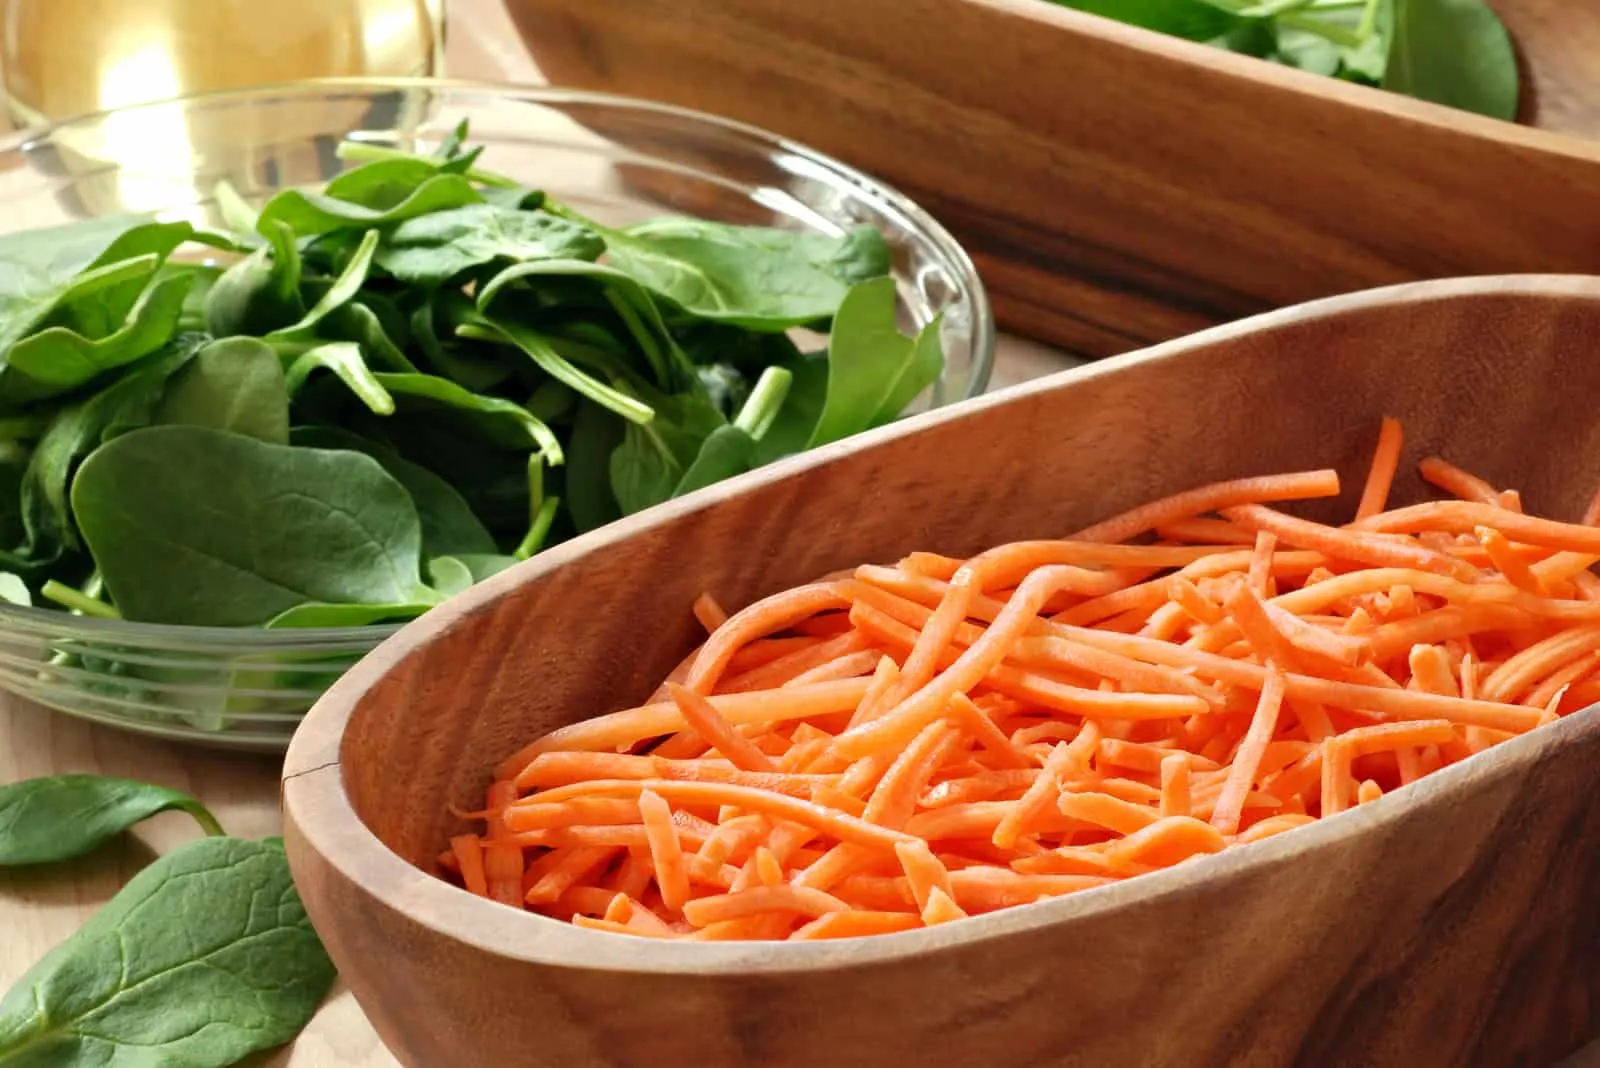 spinach and carrots 